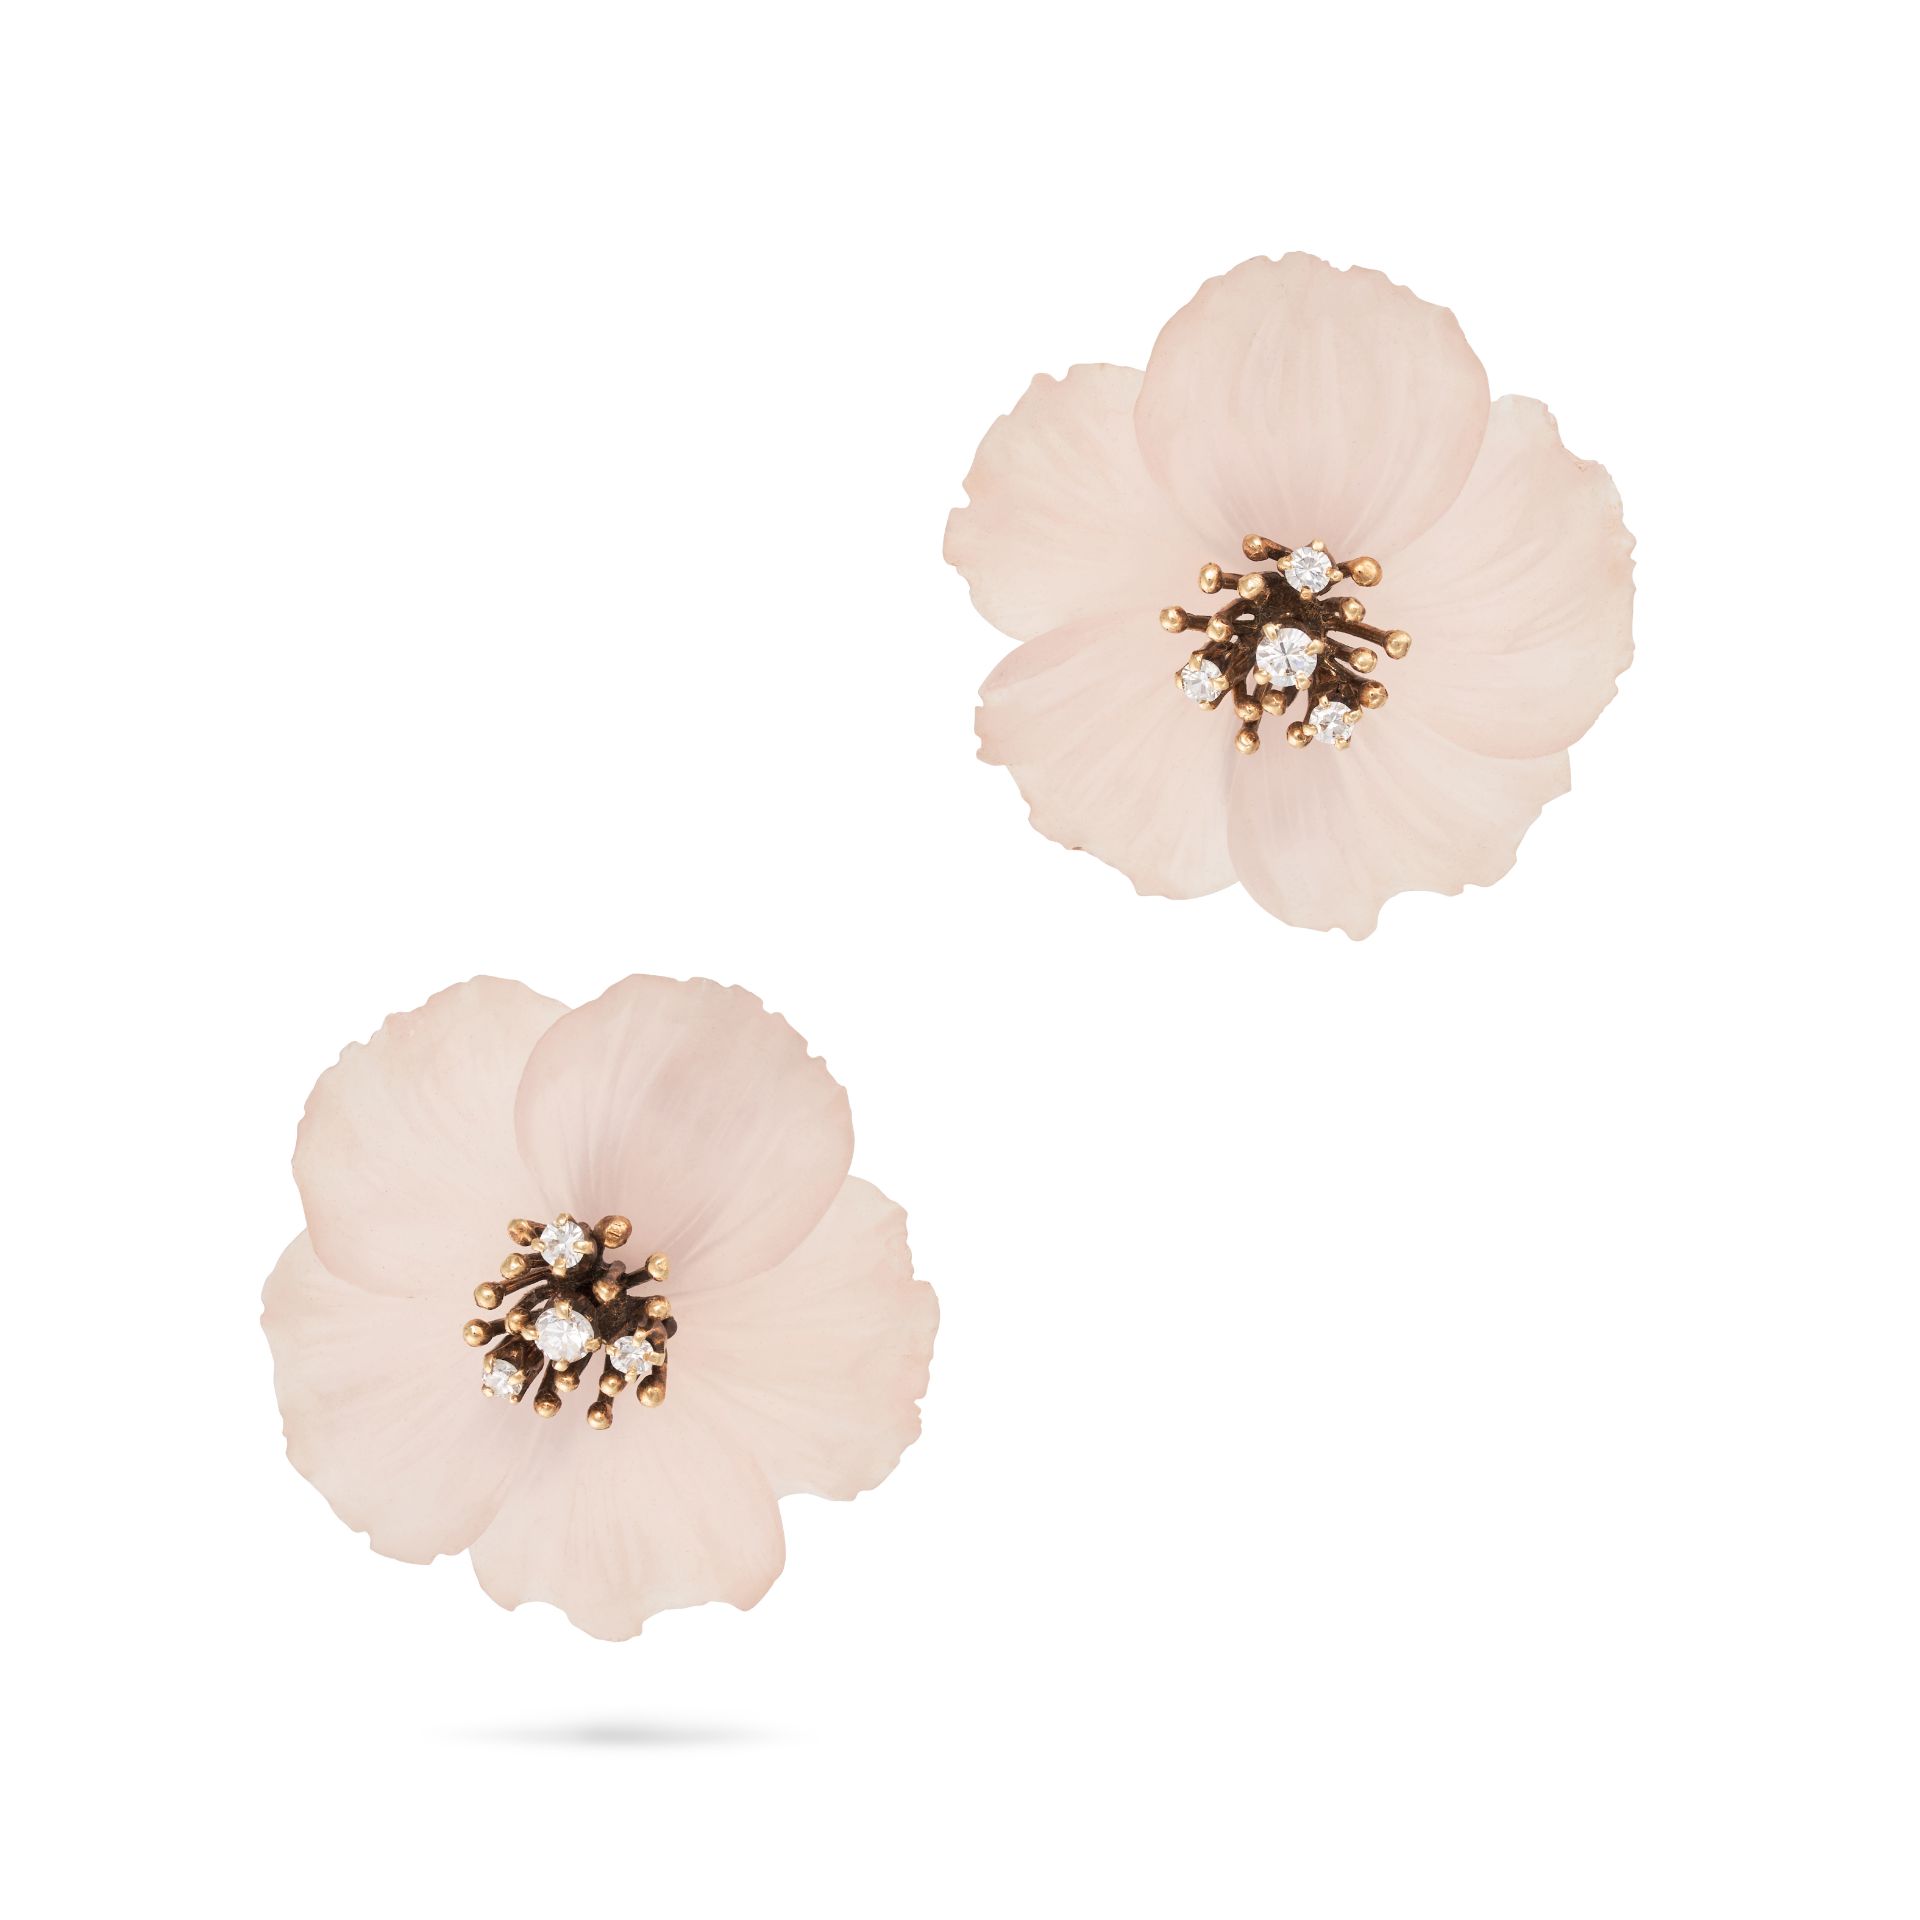 A PAIR OF ROSE QUARTZ AND DIAMOND FLOWER EARRINGS in 14ct yellow gold, each designed as a flower ...